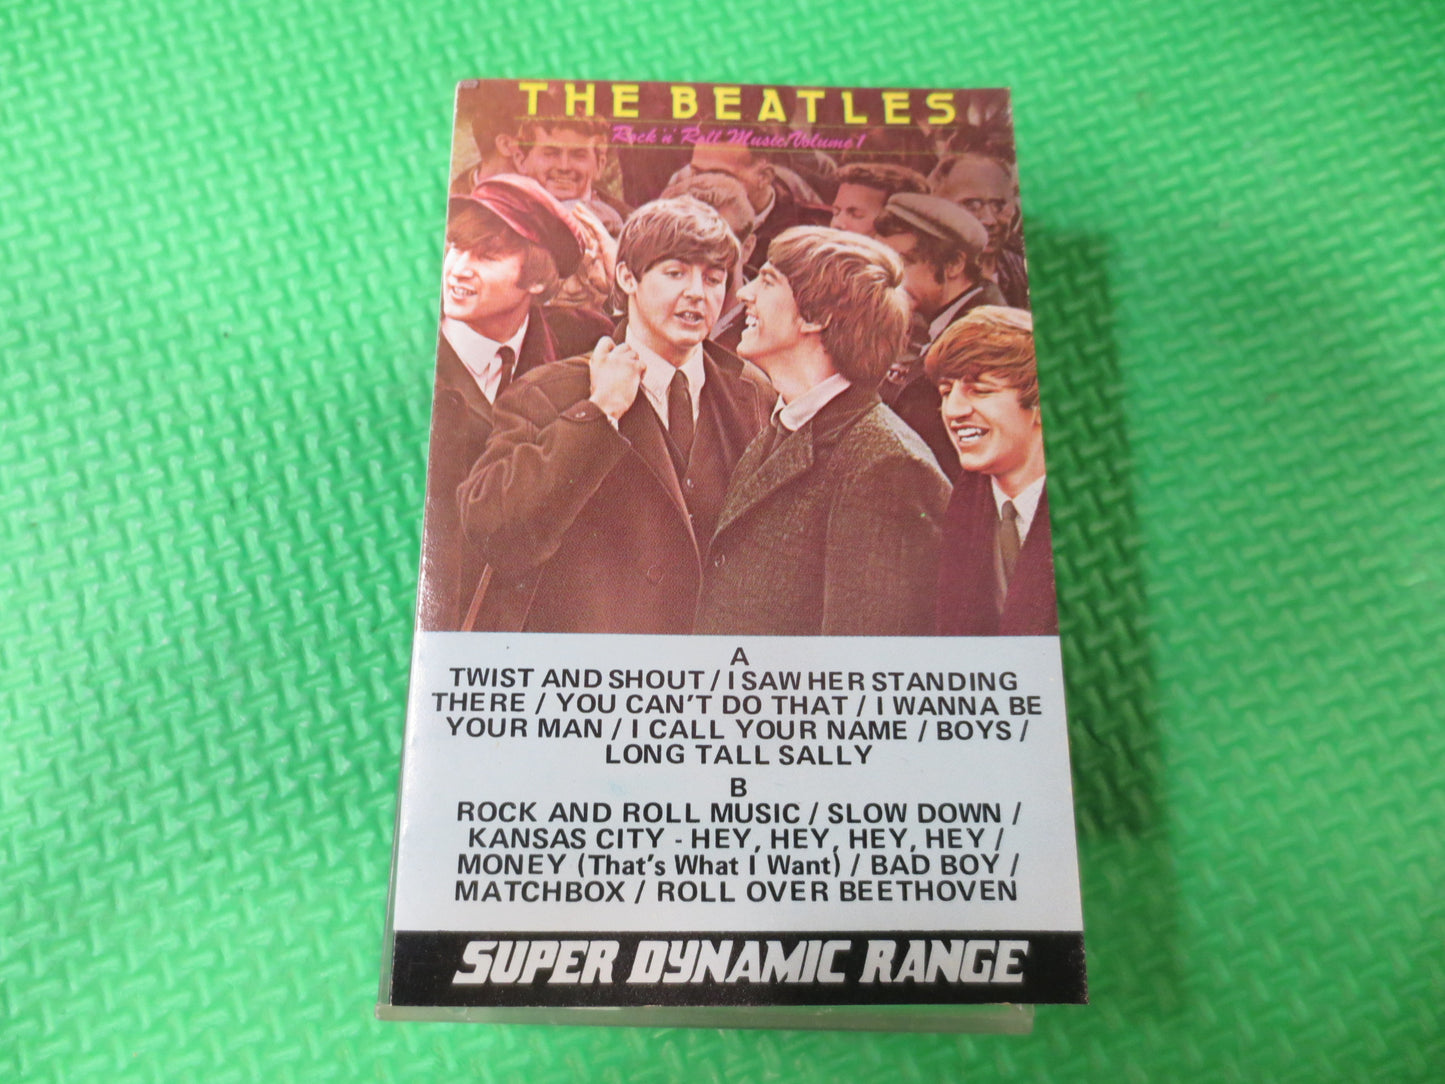 The BEATLES, ROCK and ROLL, Volume 1 Tape, Rock Album, Rock Music, Tape Cassette, Rock Cassette, Rock Tapes, 1982 Cassette